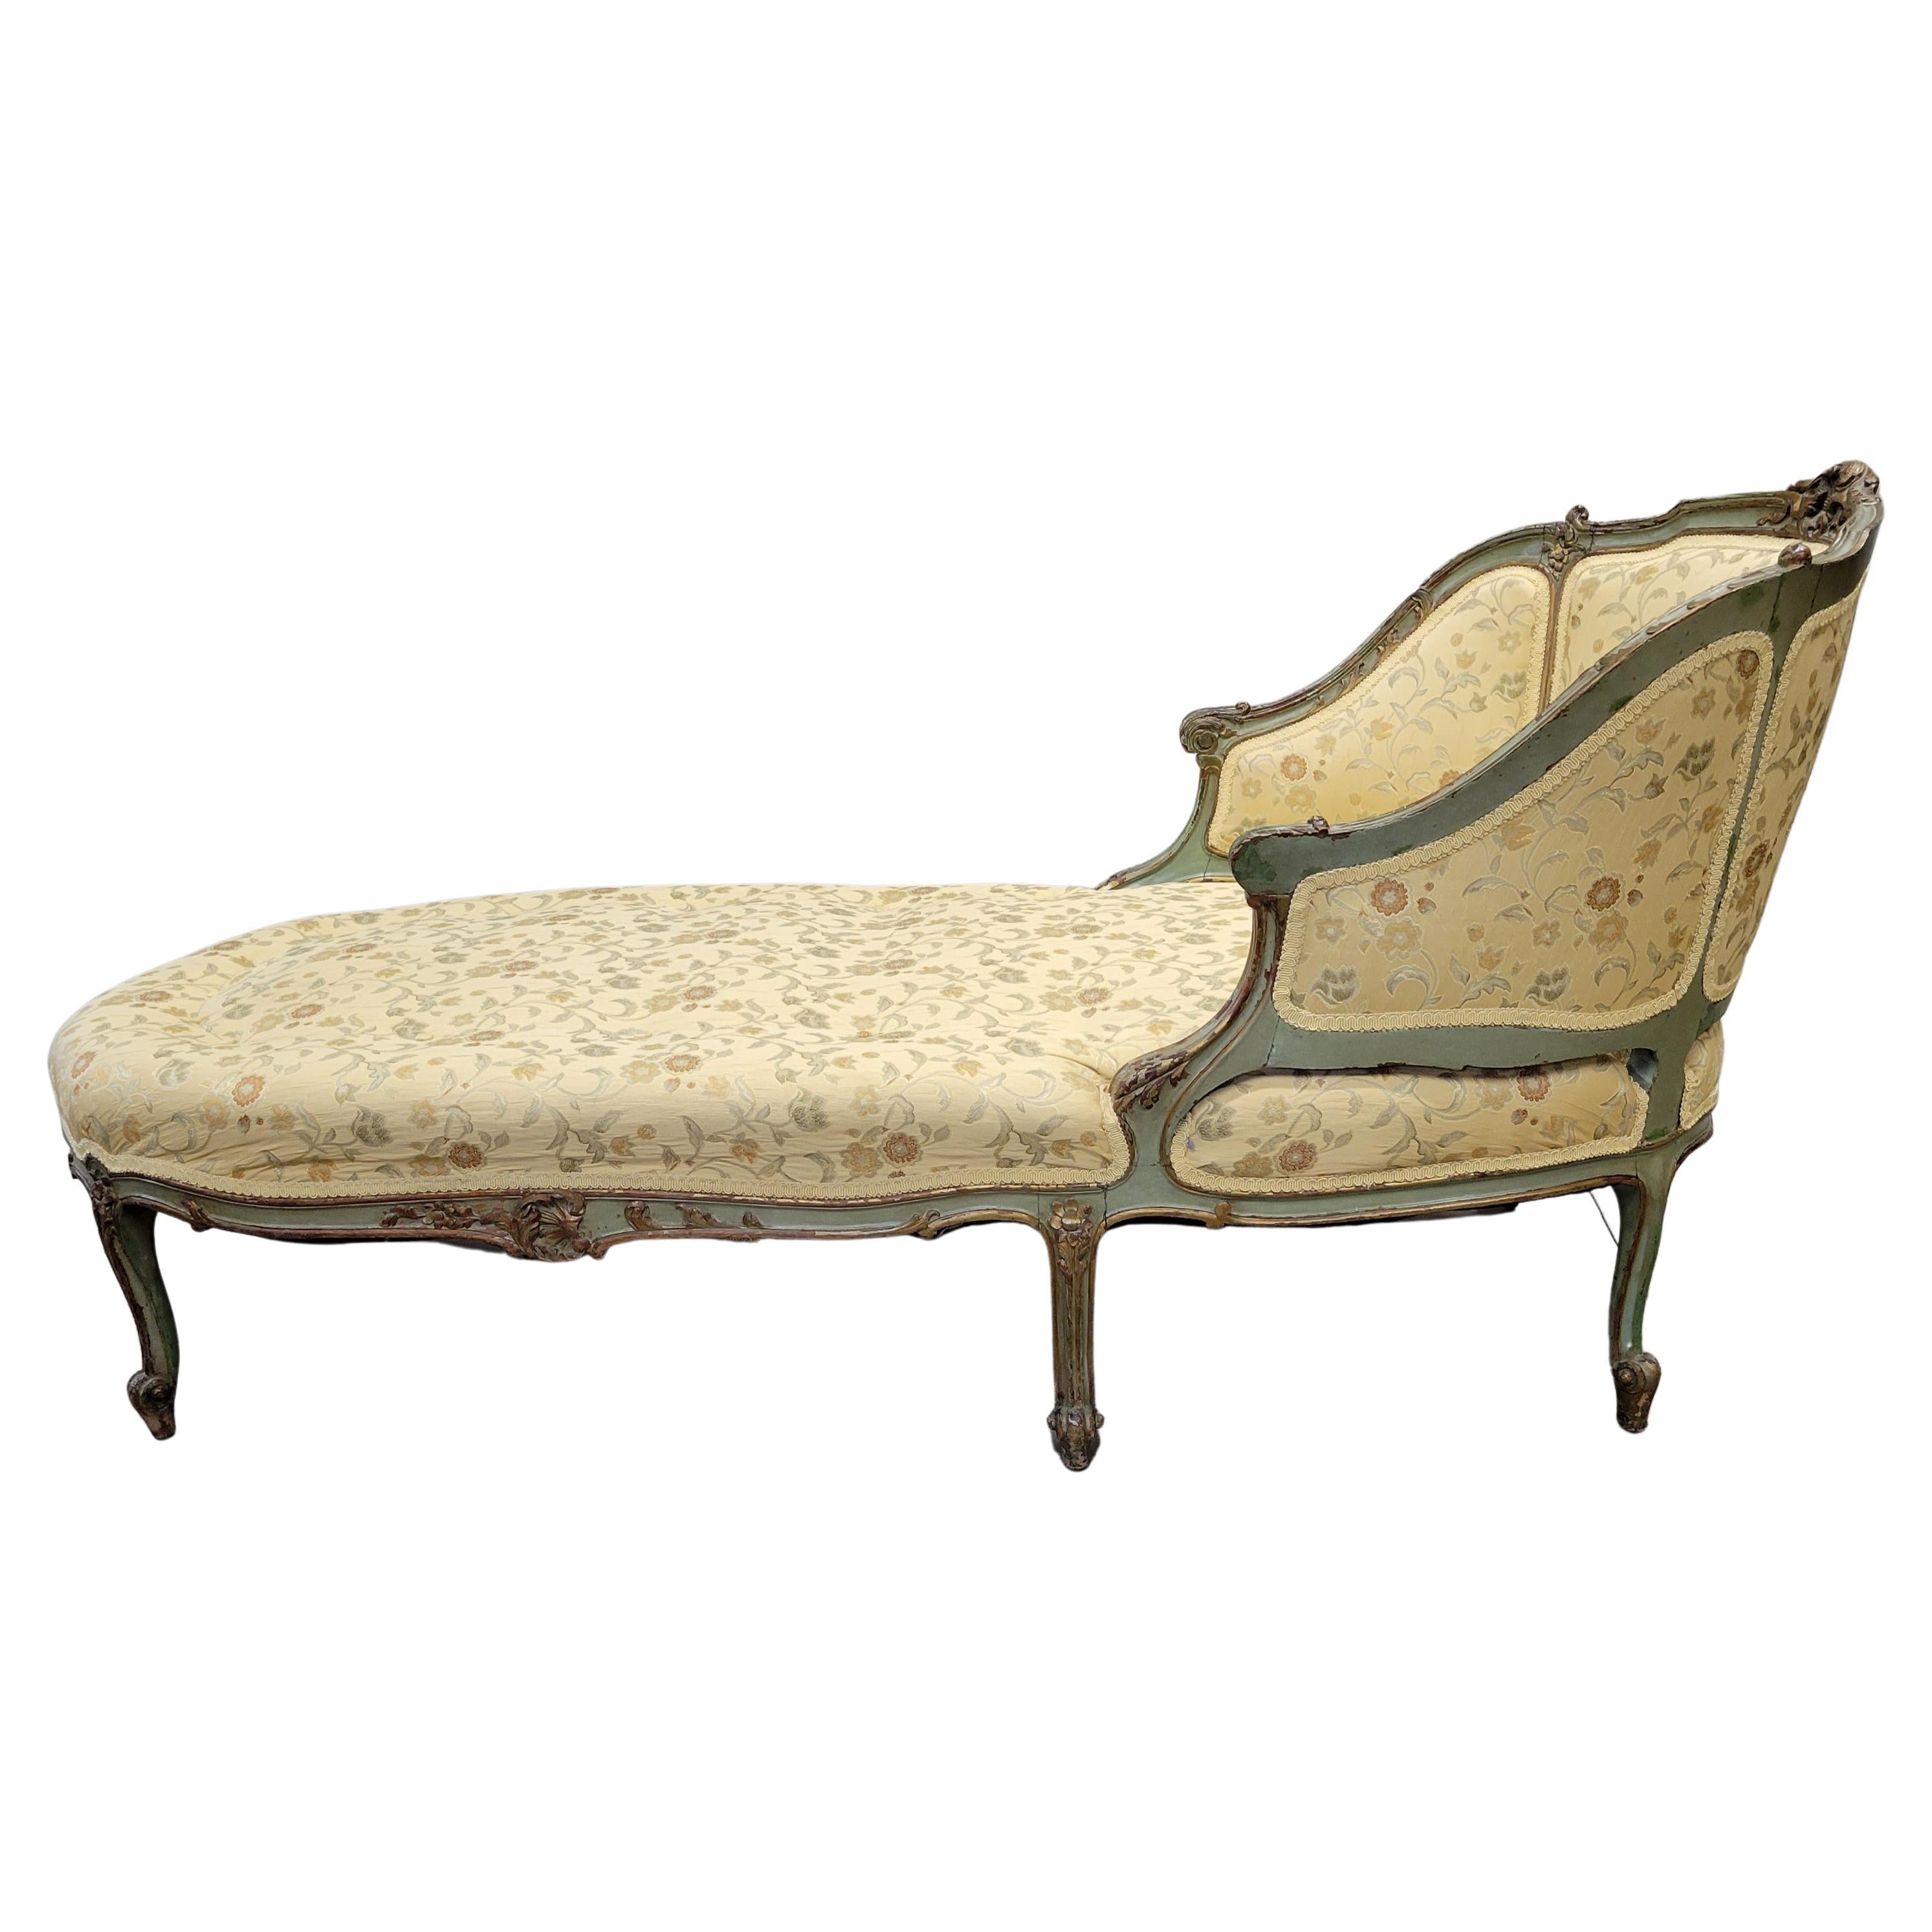 Antique French Louis XV Style Chaise Lounge with Brocade Upholstery